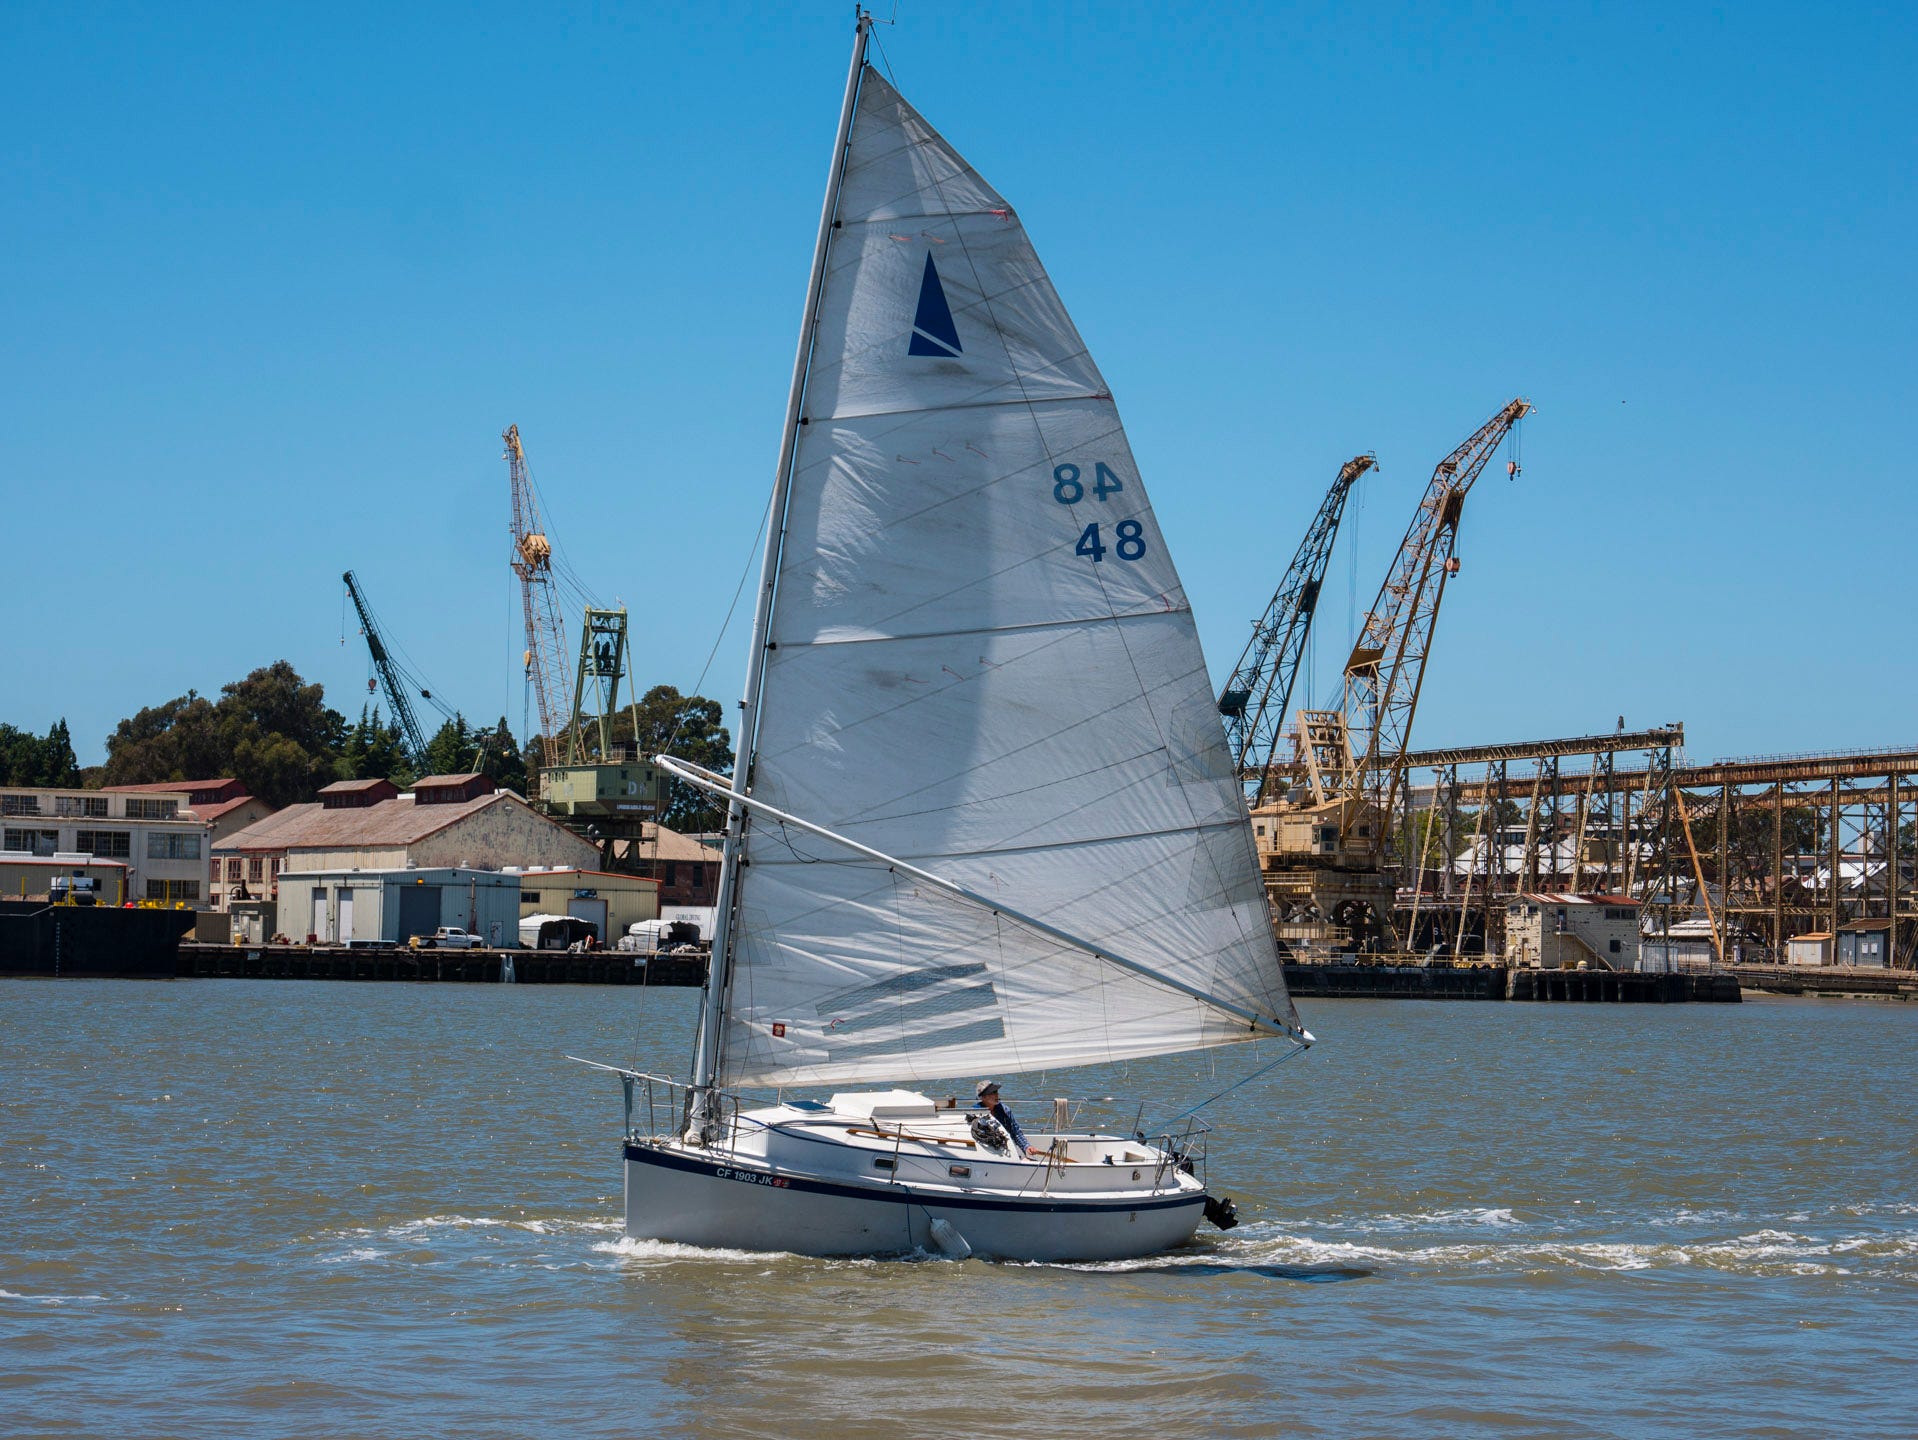 A recreational sailor pilots a small, single-mast sailboat in the channel. Behind, shipping cranes reach for the sky.